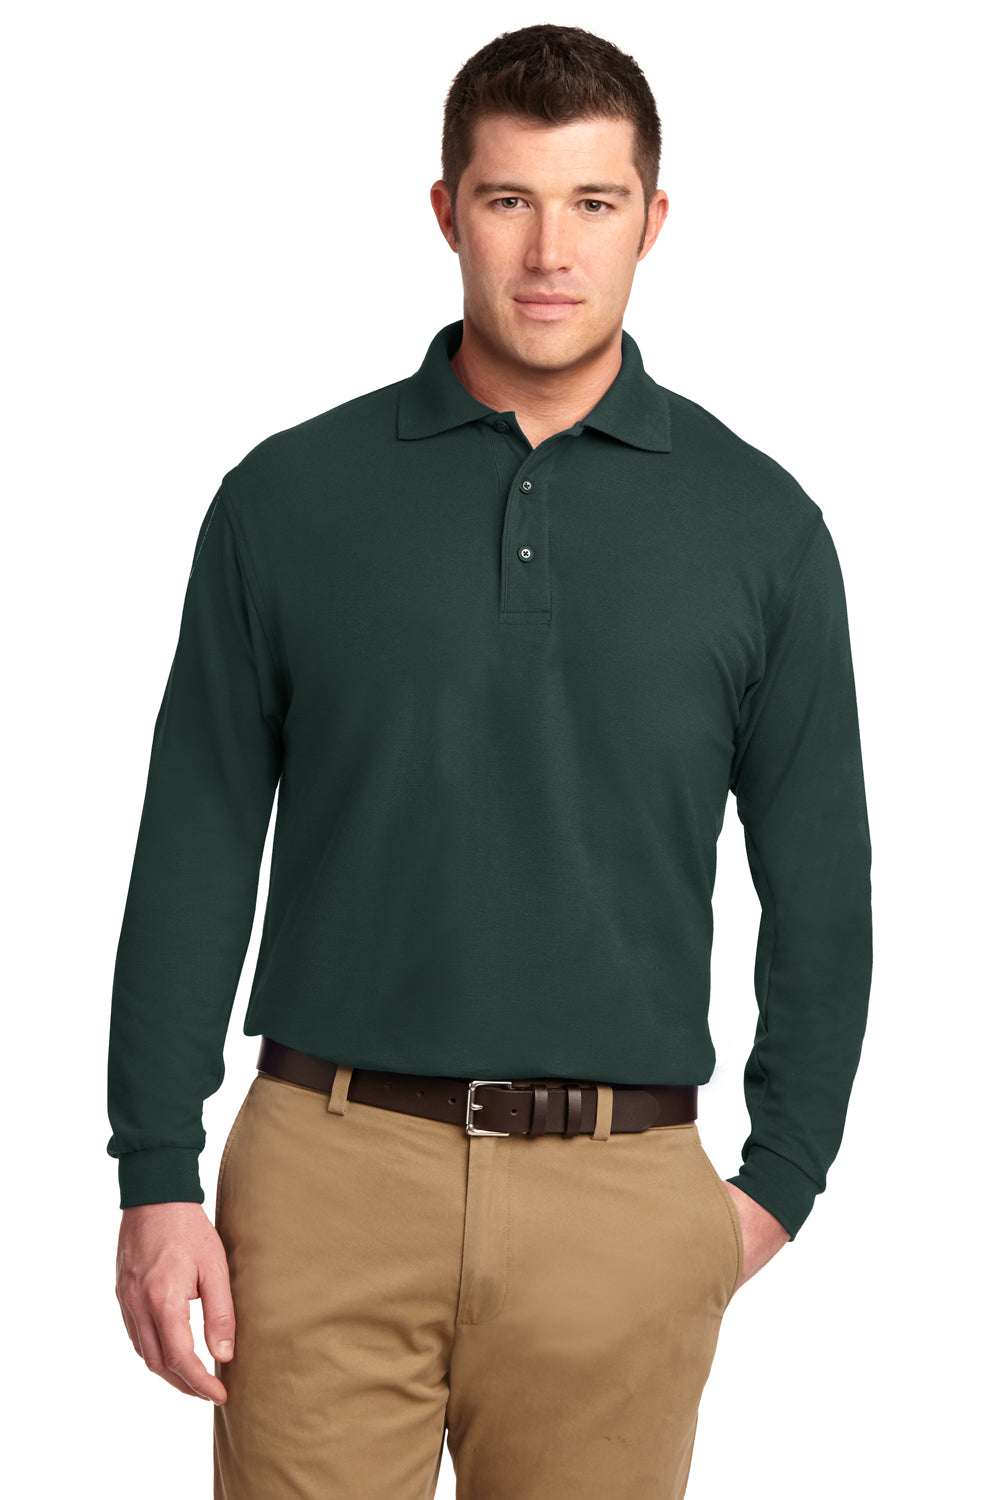 Port Authority K500LS Mens Silk Touch Wrinkle Resistant Long Sleeve Polo Shirt Dark Green Front